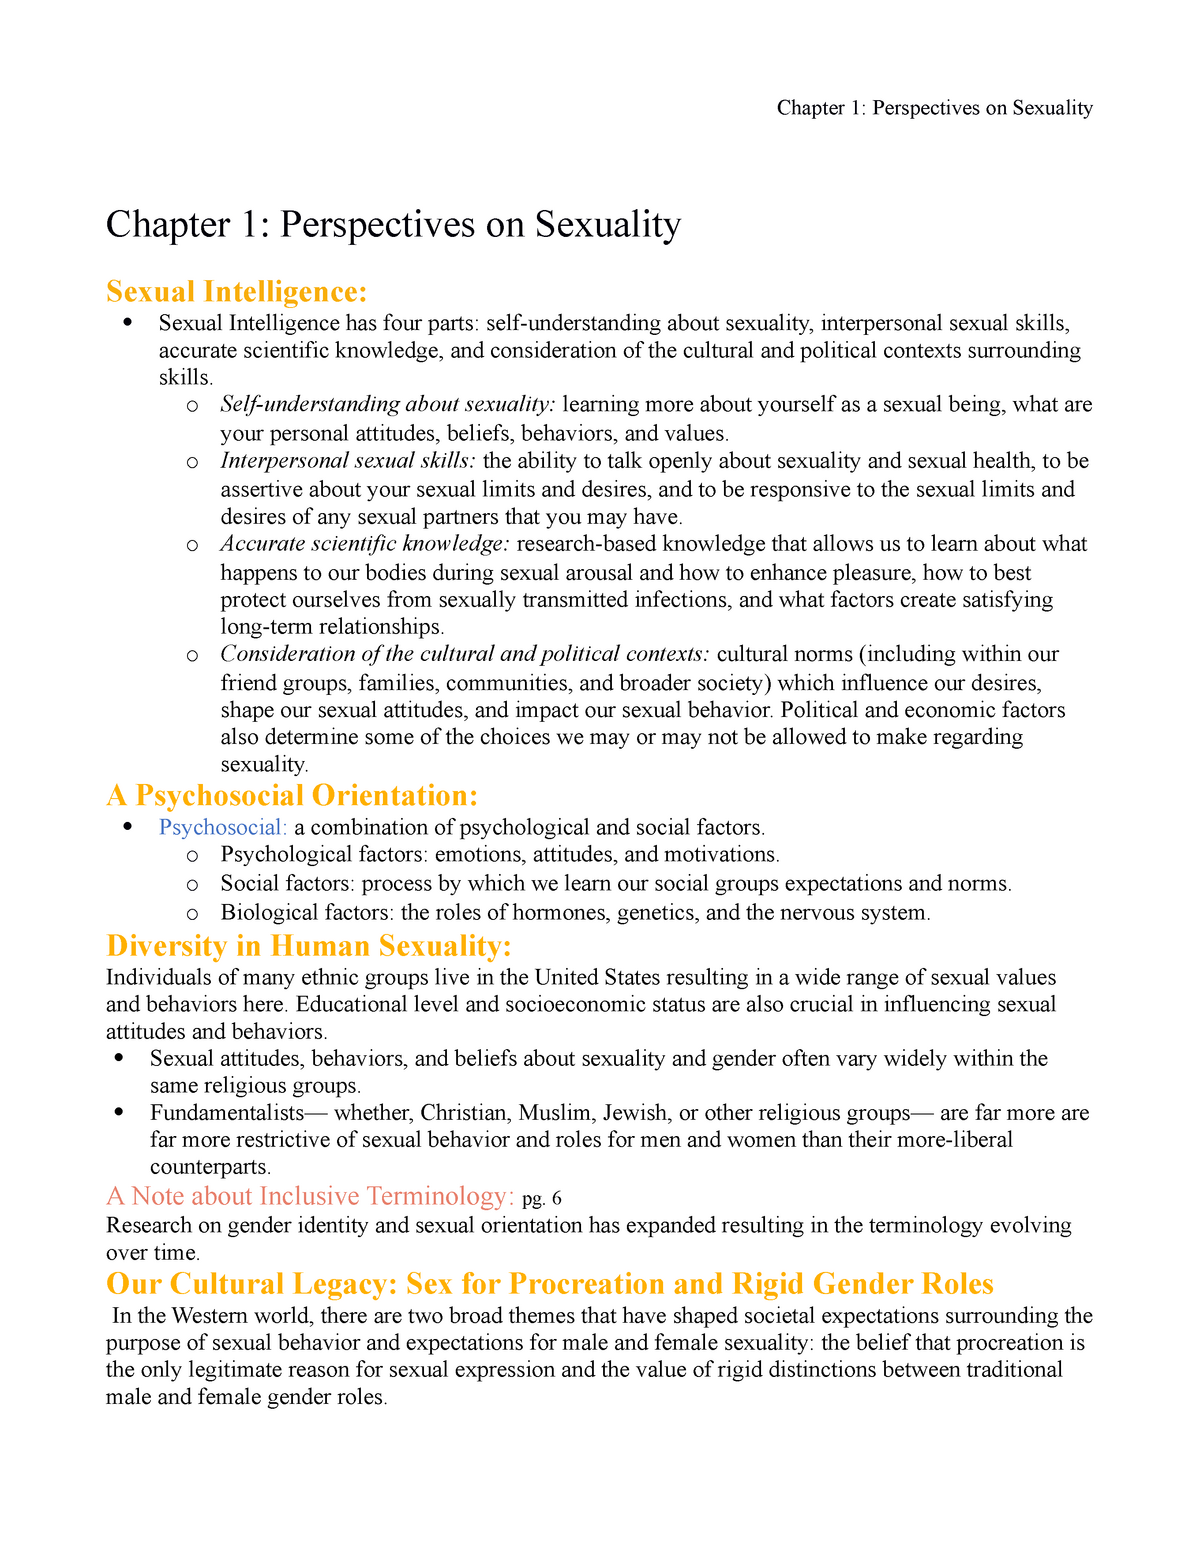 research paper topics human sexuality